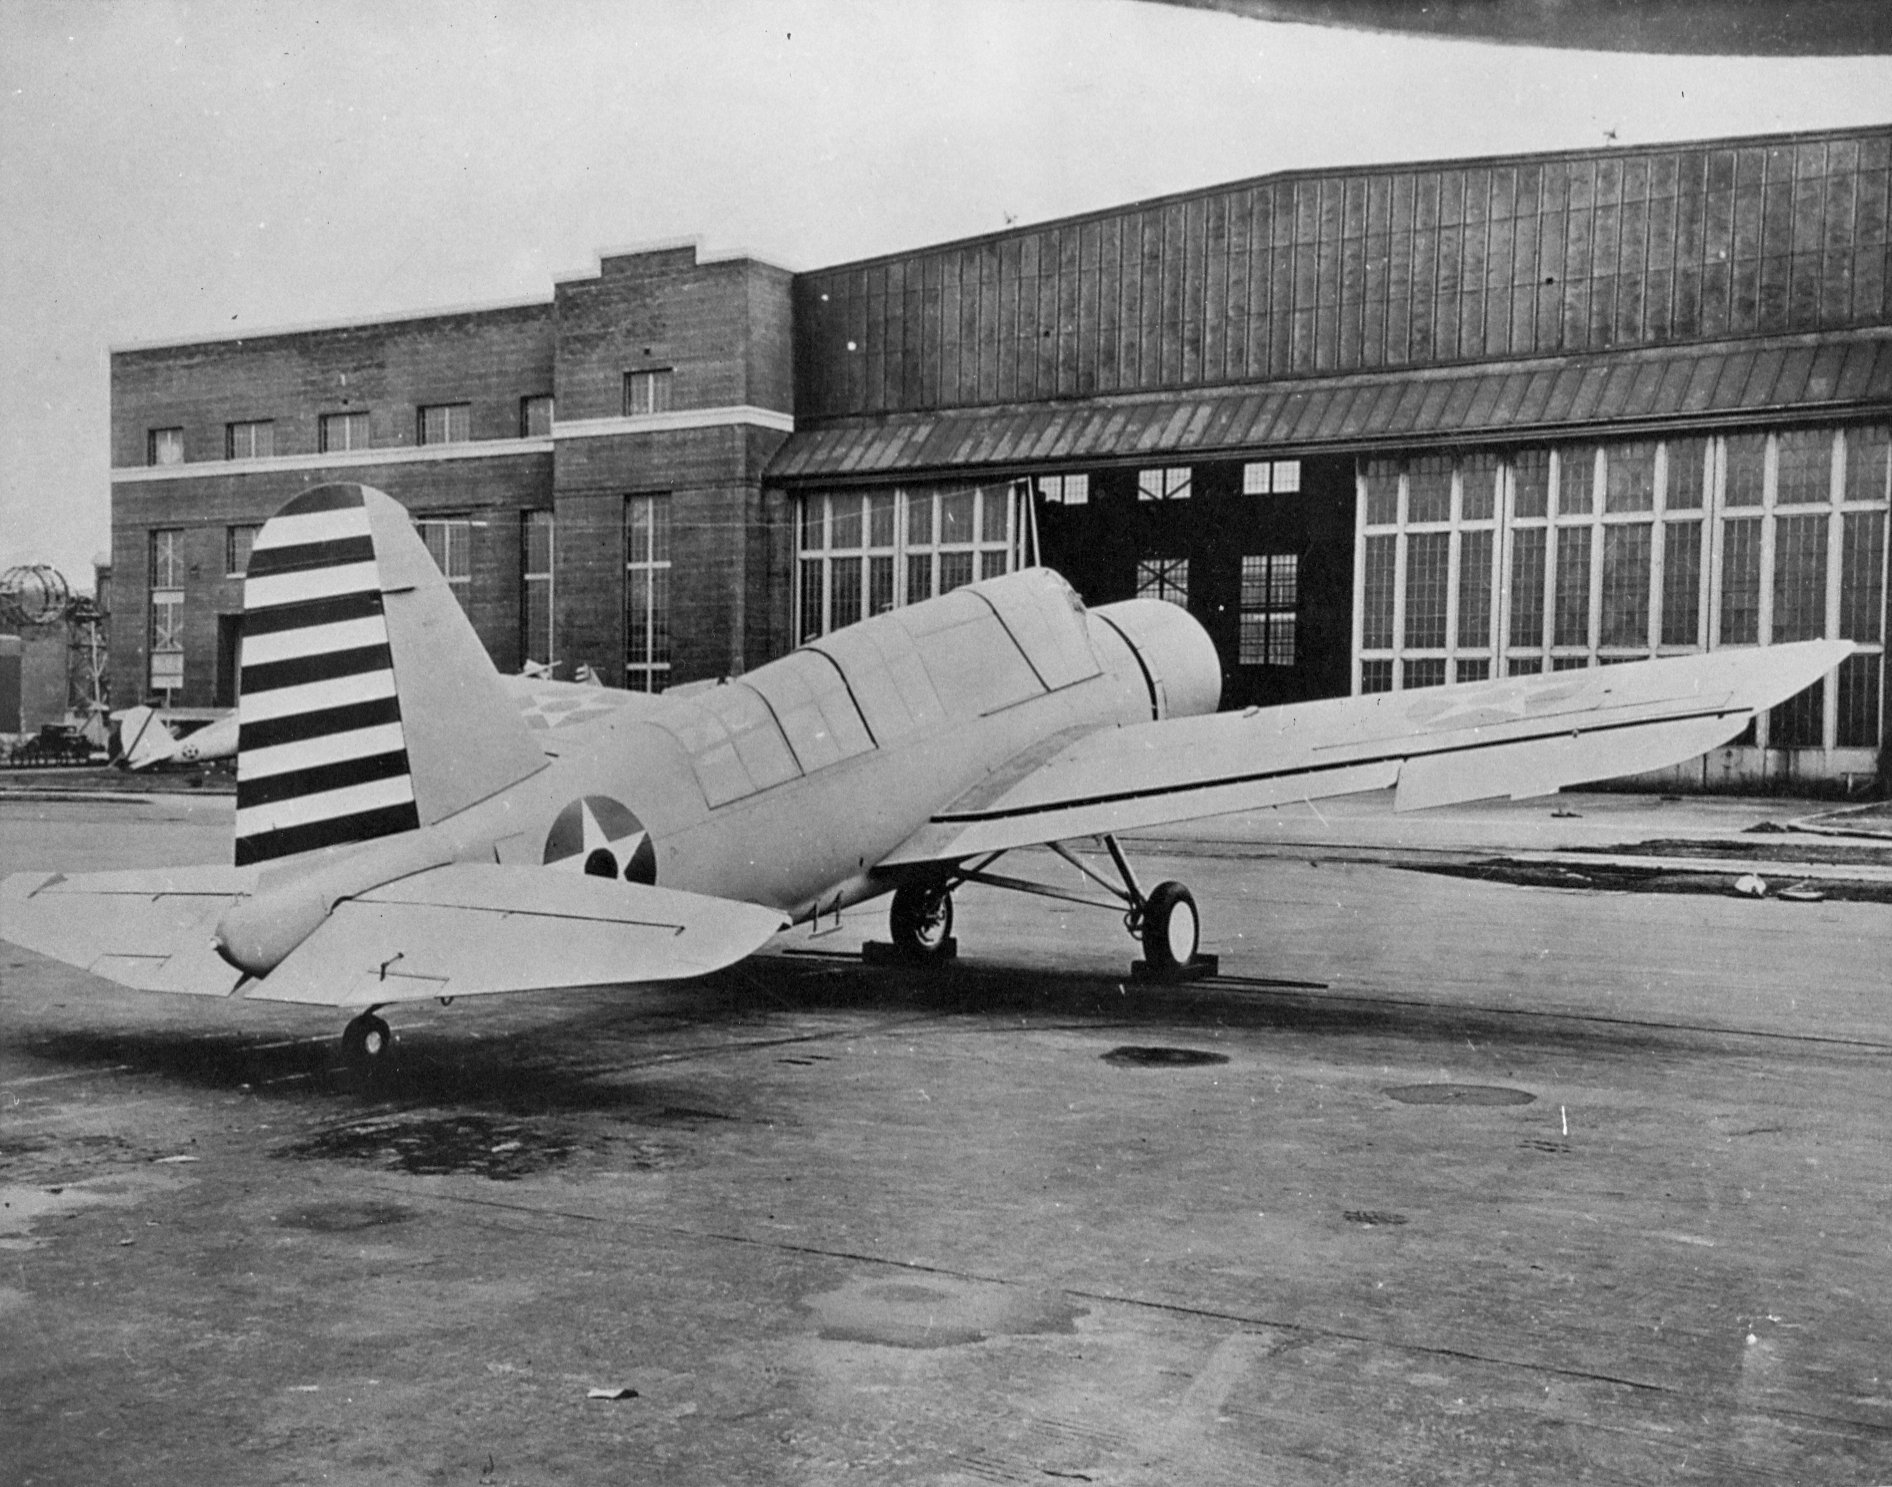 Wheeled variant of the Naval Aircraft Factory OS2N-1 Kingfisher (contract versions of the Vought OS2U-3) at rest at the Naval Aircraft Factory in Philadelphia, Pennsylvania, United States, 1942